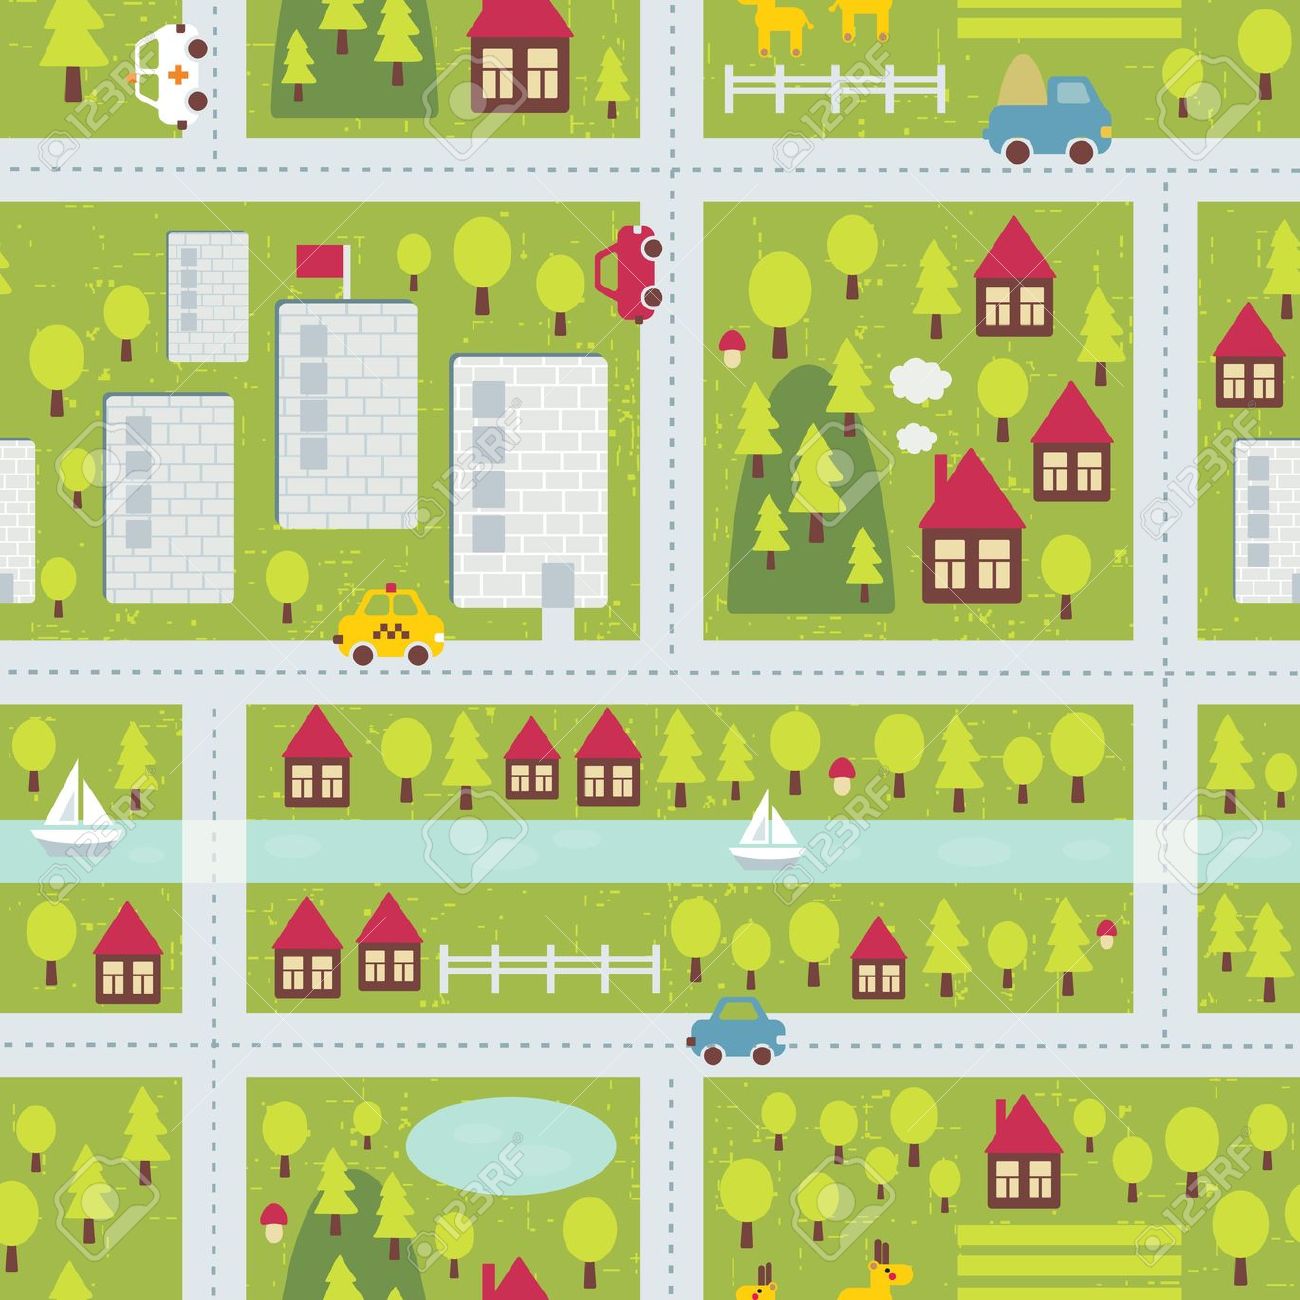 Town map clipart image